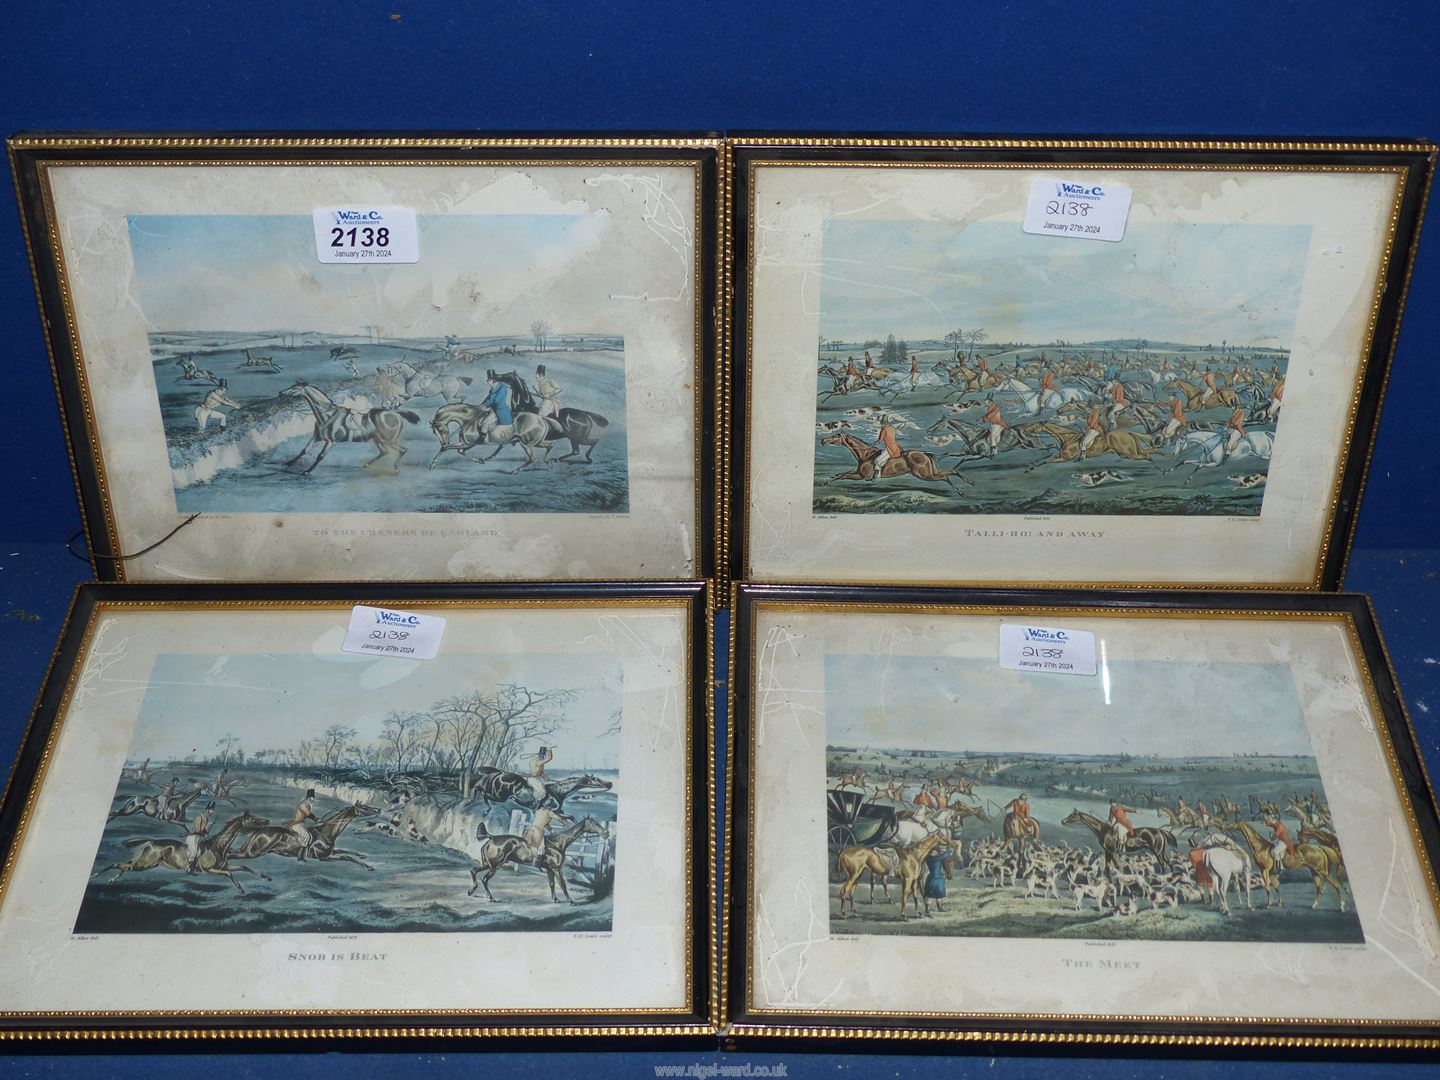 Four H. Alken hunting Prints including Snob is Beat, The Meet, etc.